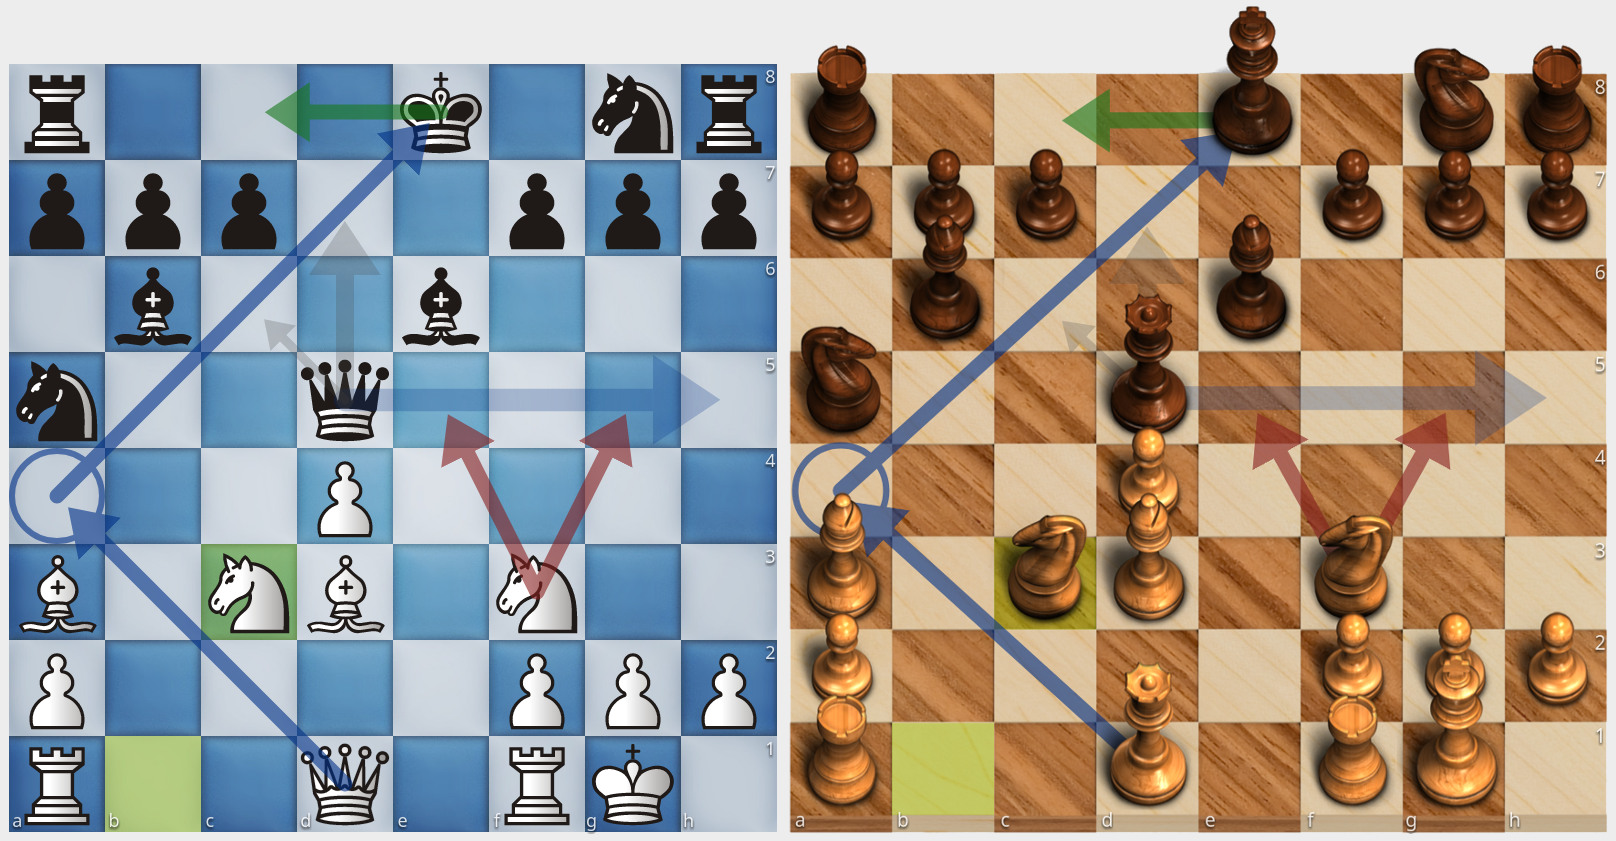 Chess Analysis Board and PGN Editor - Chess.com